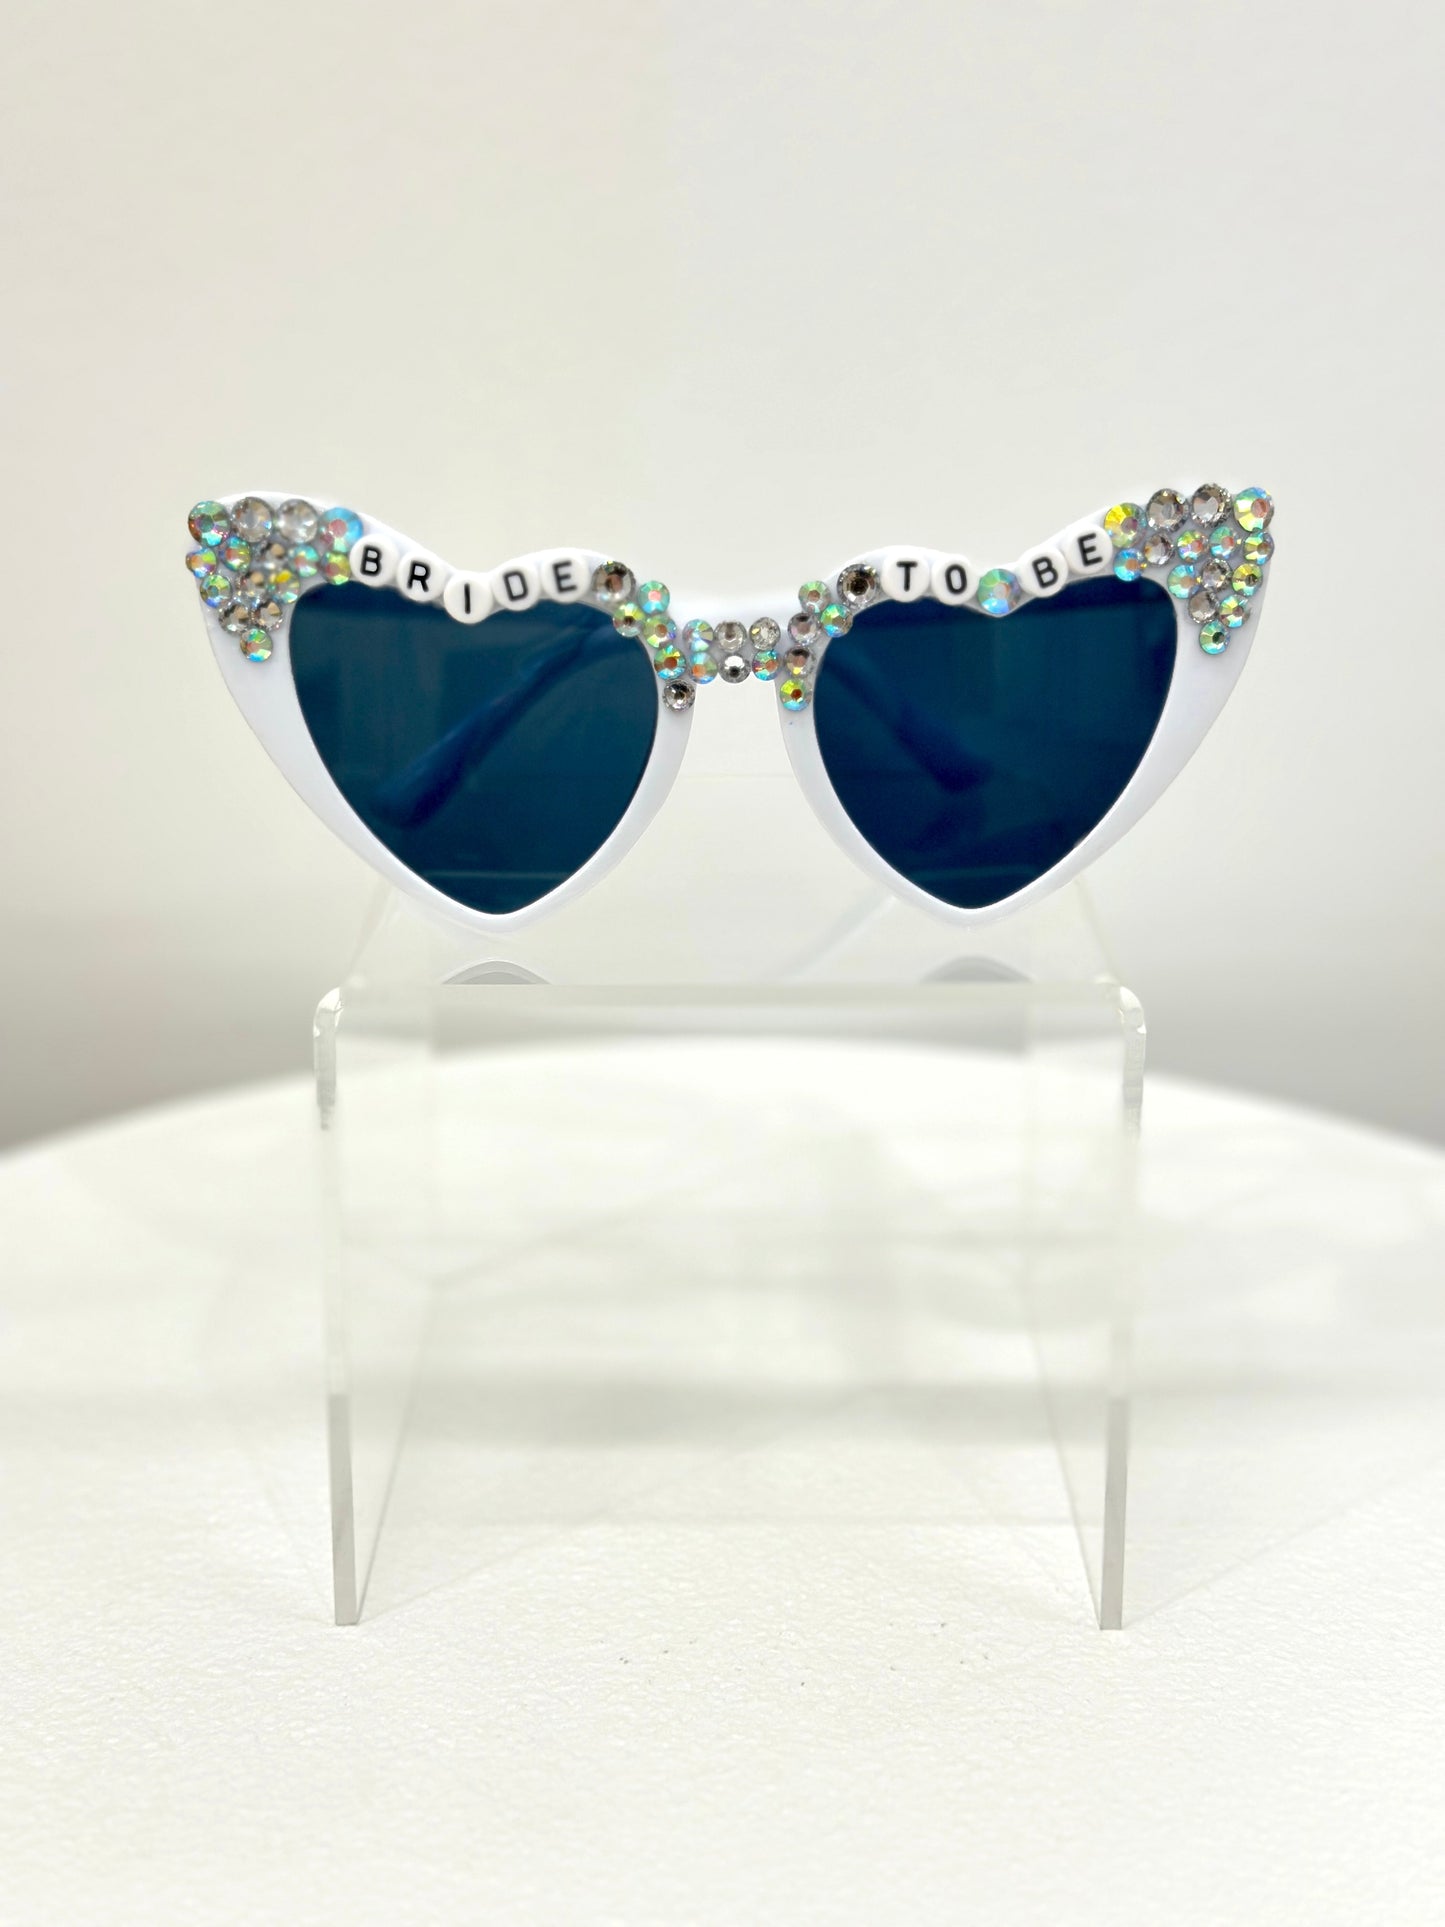 "Bride to Be" Heart Sunglasses